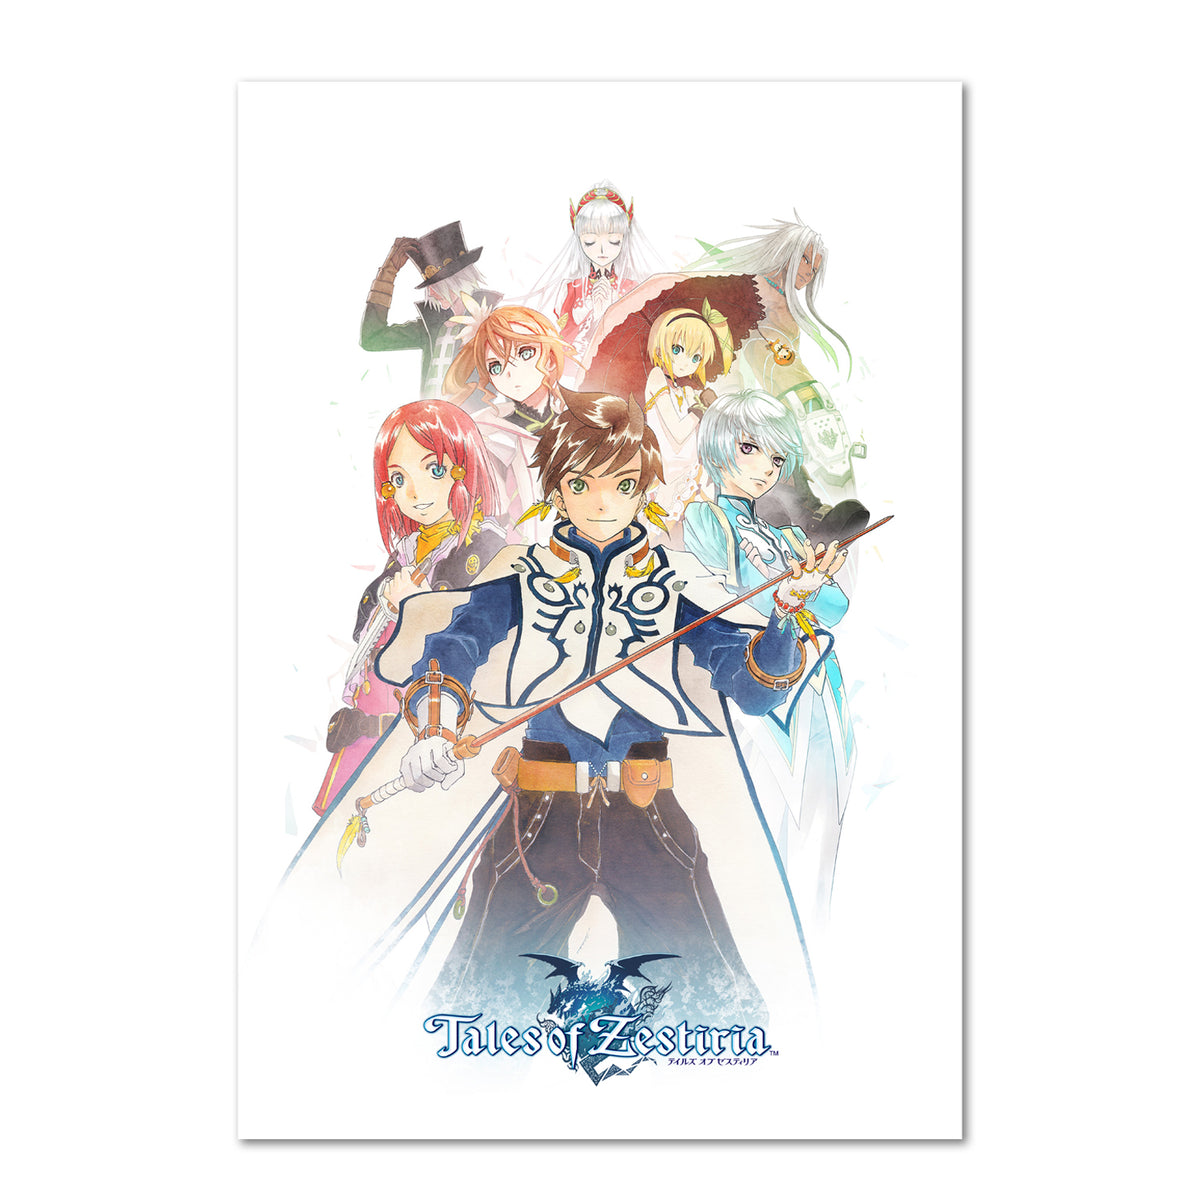 Tales of Zestiria the X Movie Poster Promotion Art